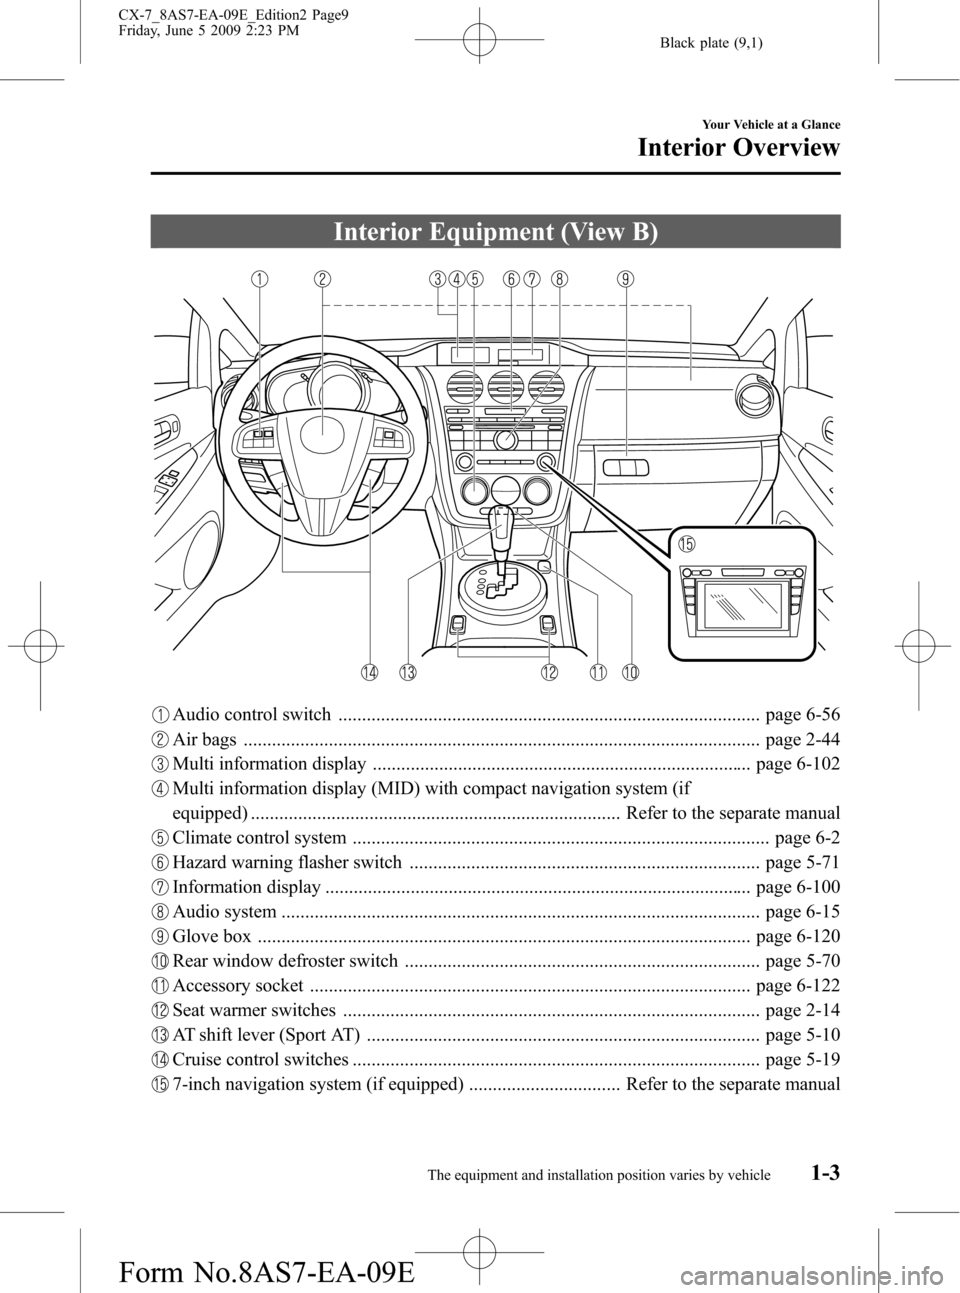 MAZDA MODEL CX-7 2010  Owners Manual (in English) Black plate (9,1)
Interior Equipment (View B)
Audio control switch ......................................................................................... page 6-56
Air bags ........................